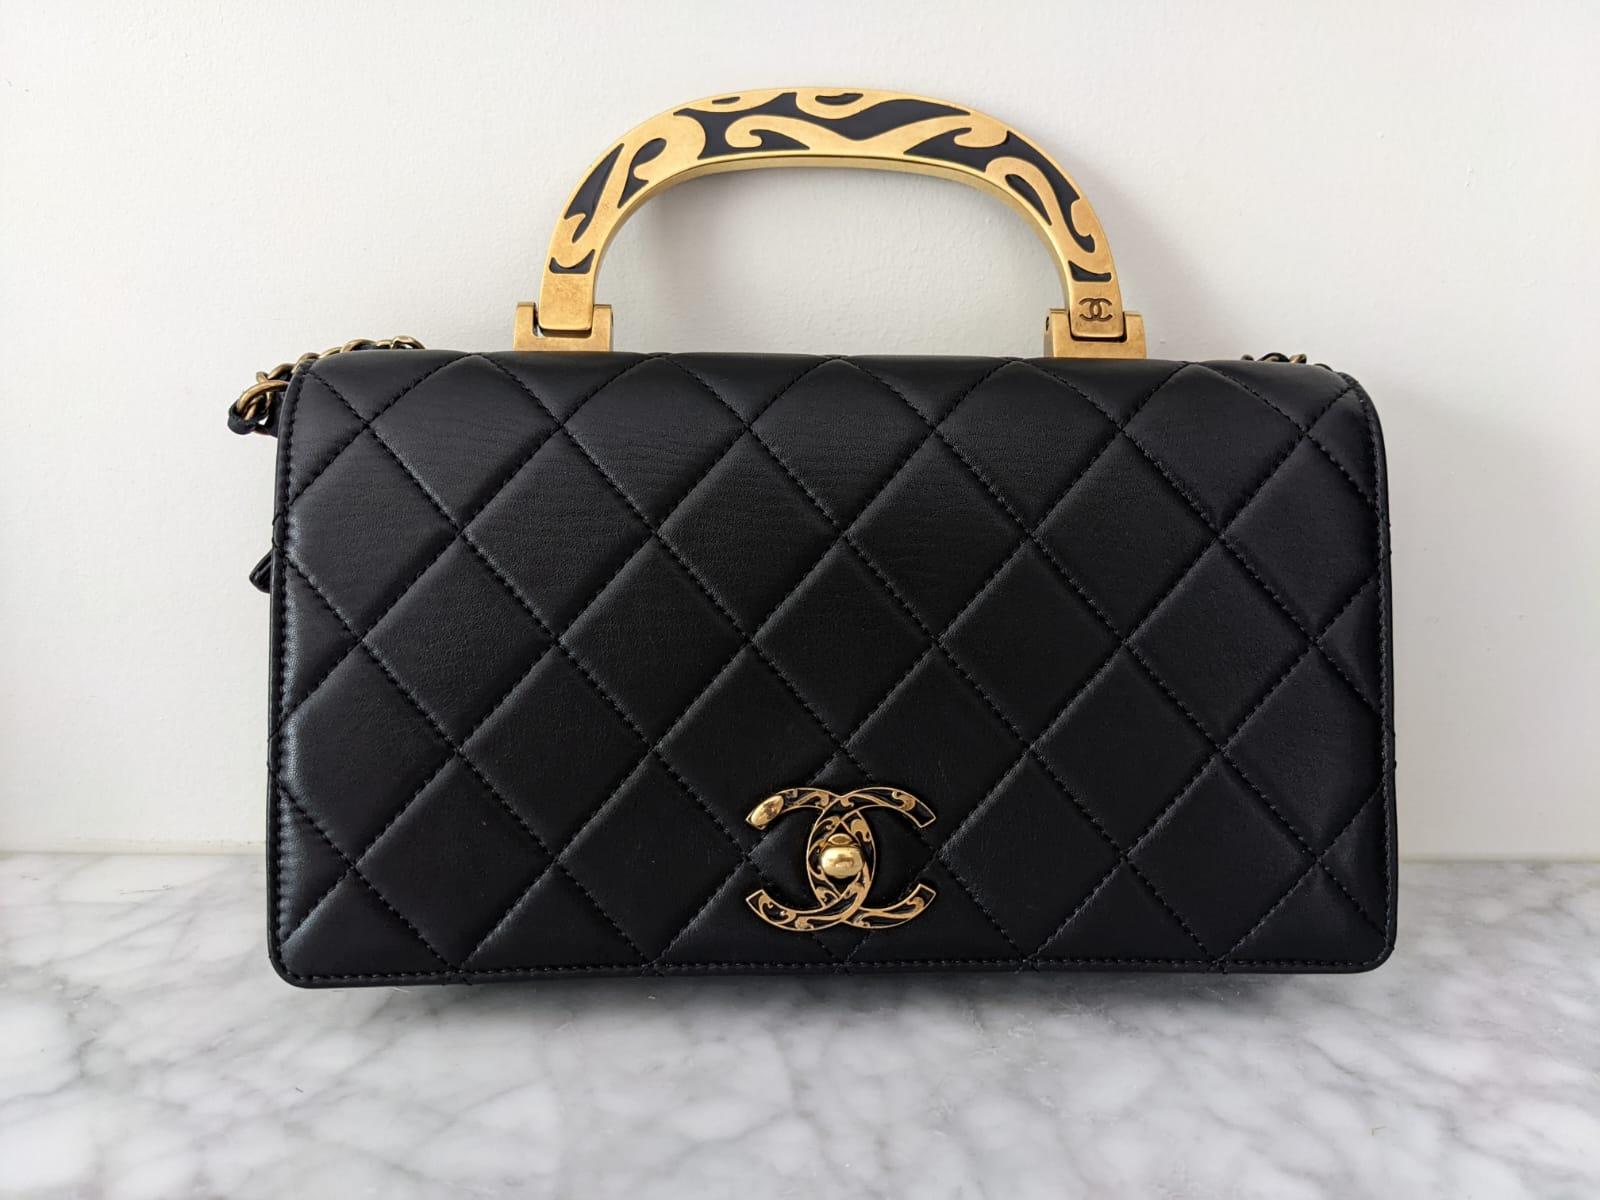 Very rare piece
the same collection in a larger size as bag seen on kate middleton

Lambskin leather 
comes with dust bag and authenticity card.
In like new to excellent condition; minimal wear throughout

Can be worn as a crossbody or top handle